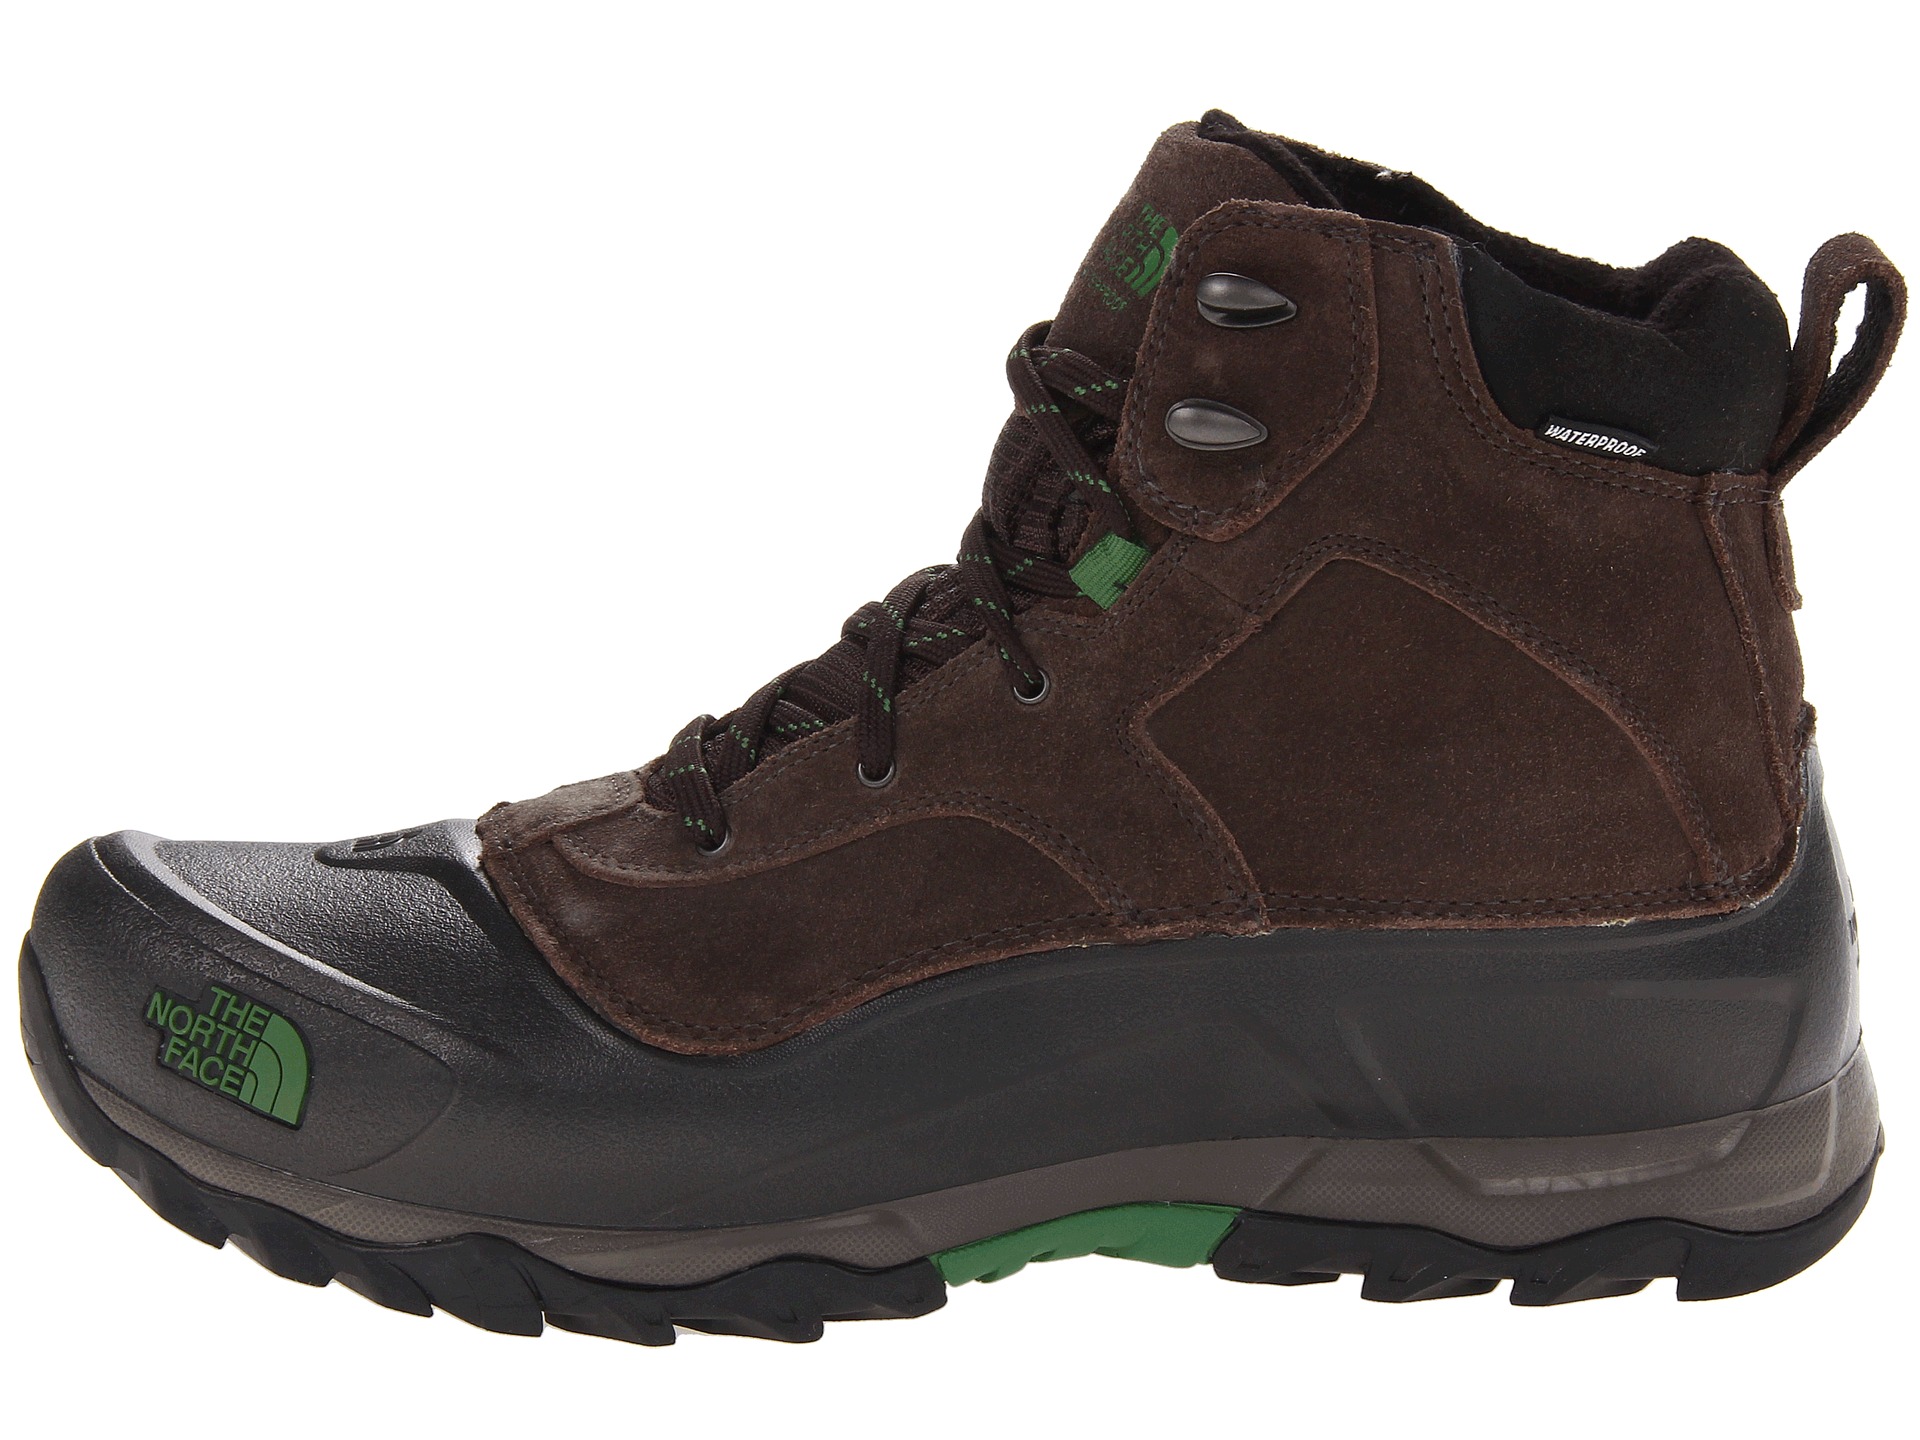 north face work shoes